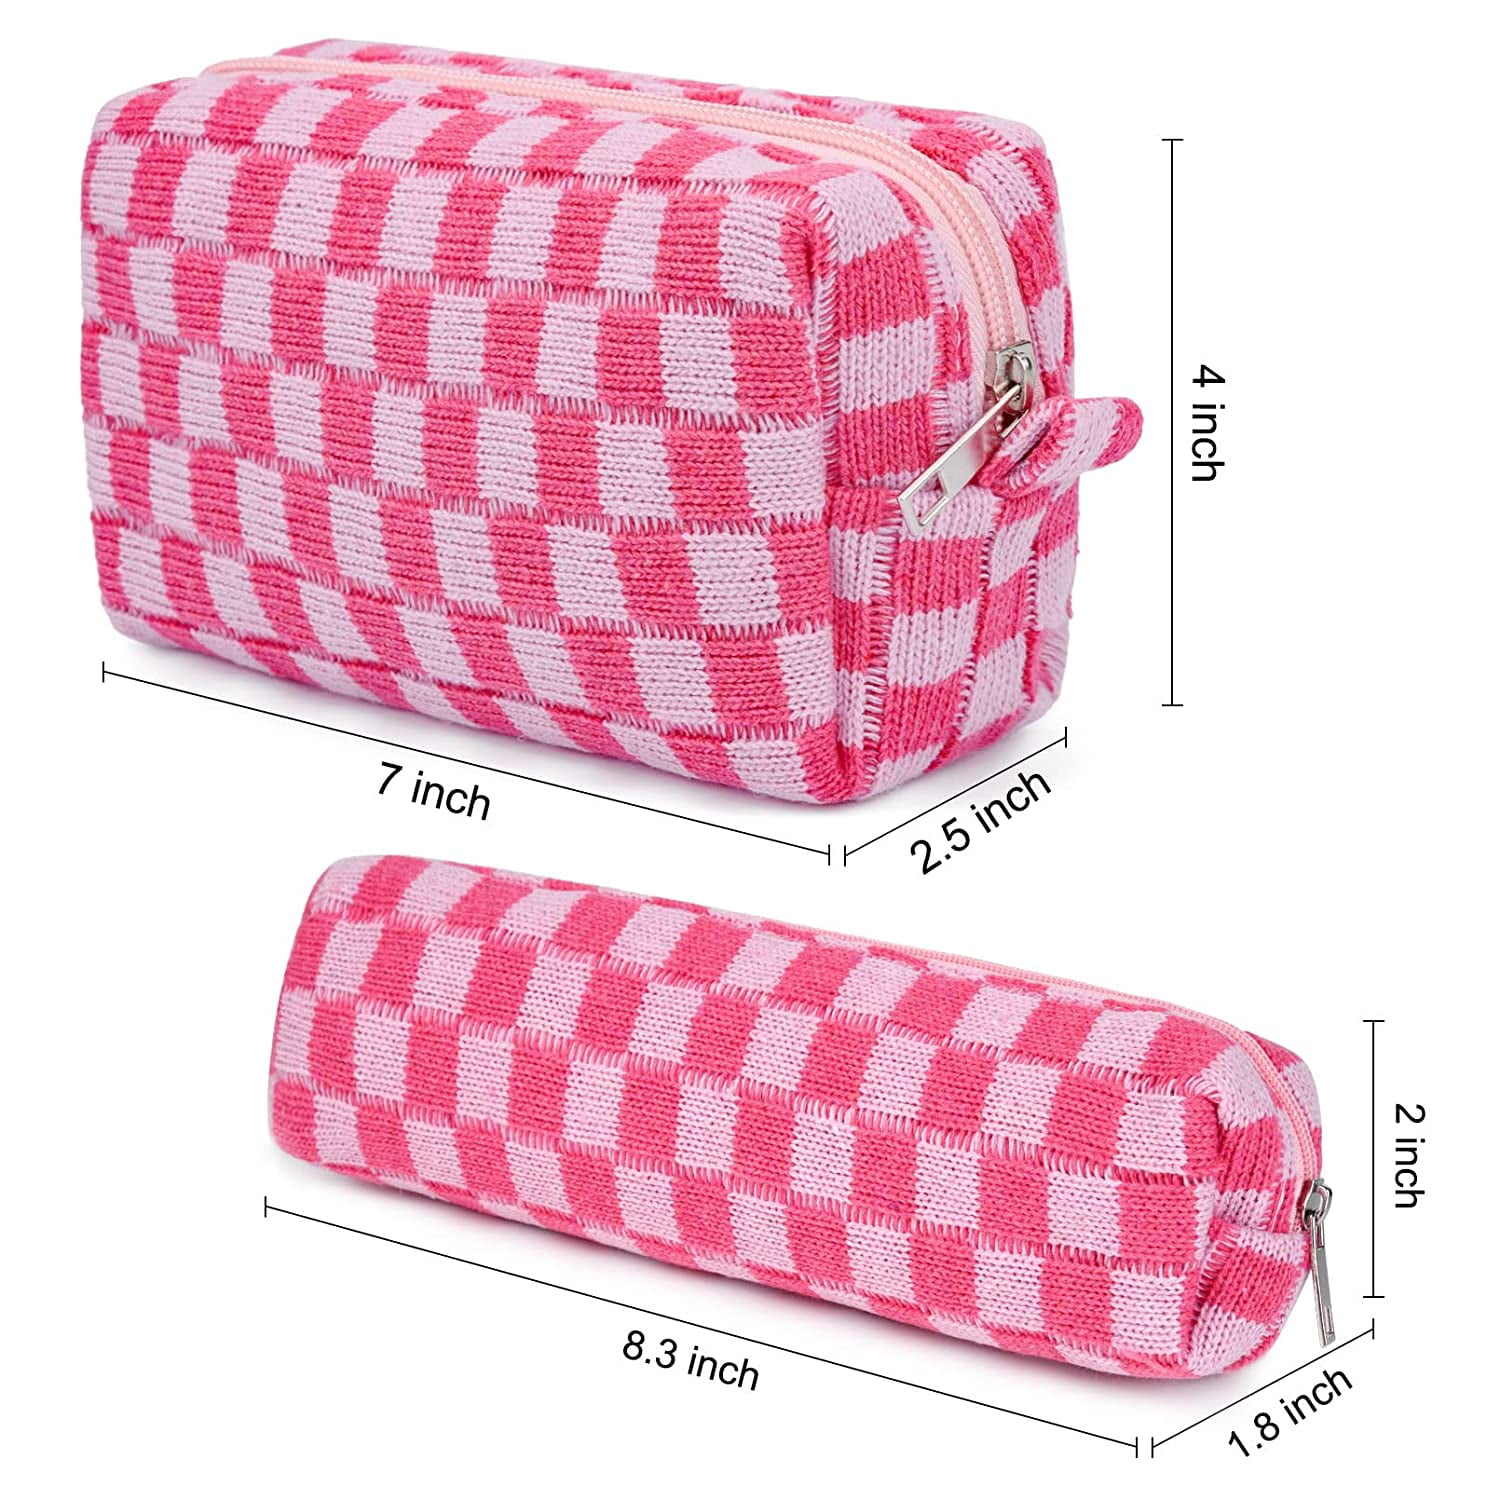  SOIDRAM 2 Pieces Makeup Bag Checkered Cosmetic Bag Purple Blue  Makeup Pouch Travel Toiletry Bag Organizer Cute Makeup Brushes Storage Bag  for Women : Beauty & Personal Care